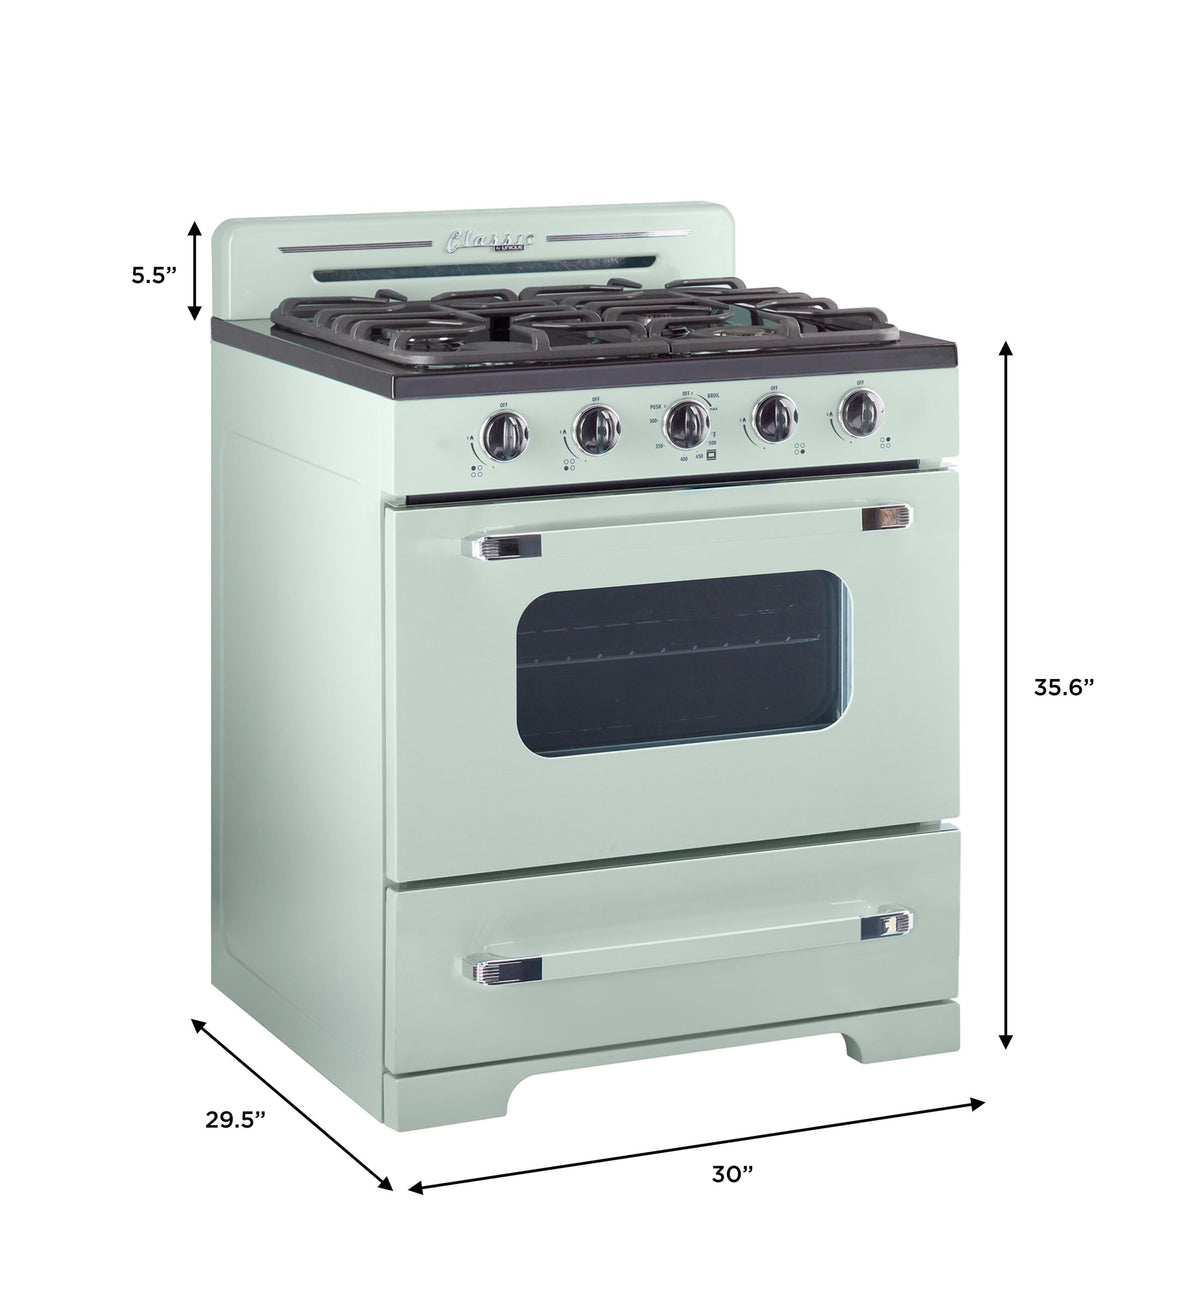 Unique 30 inches Classic Retro Summer Mint Green Offgrid Range with Large Power burner